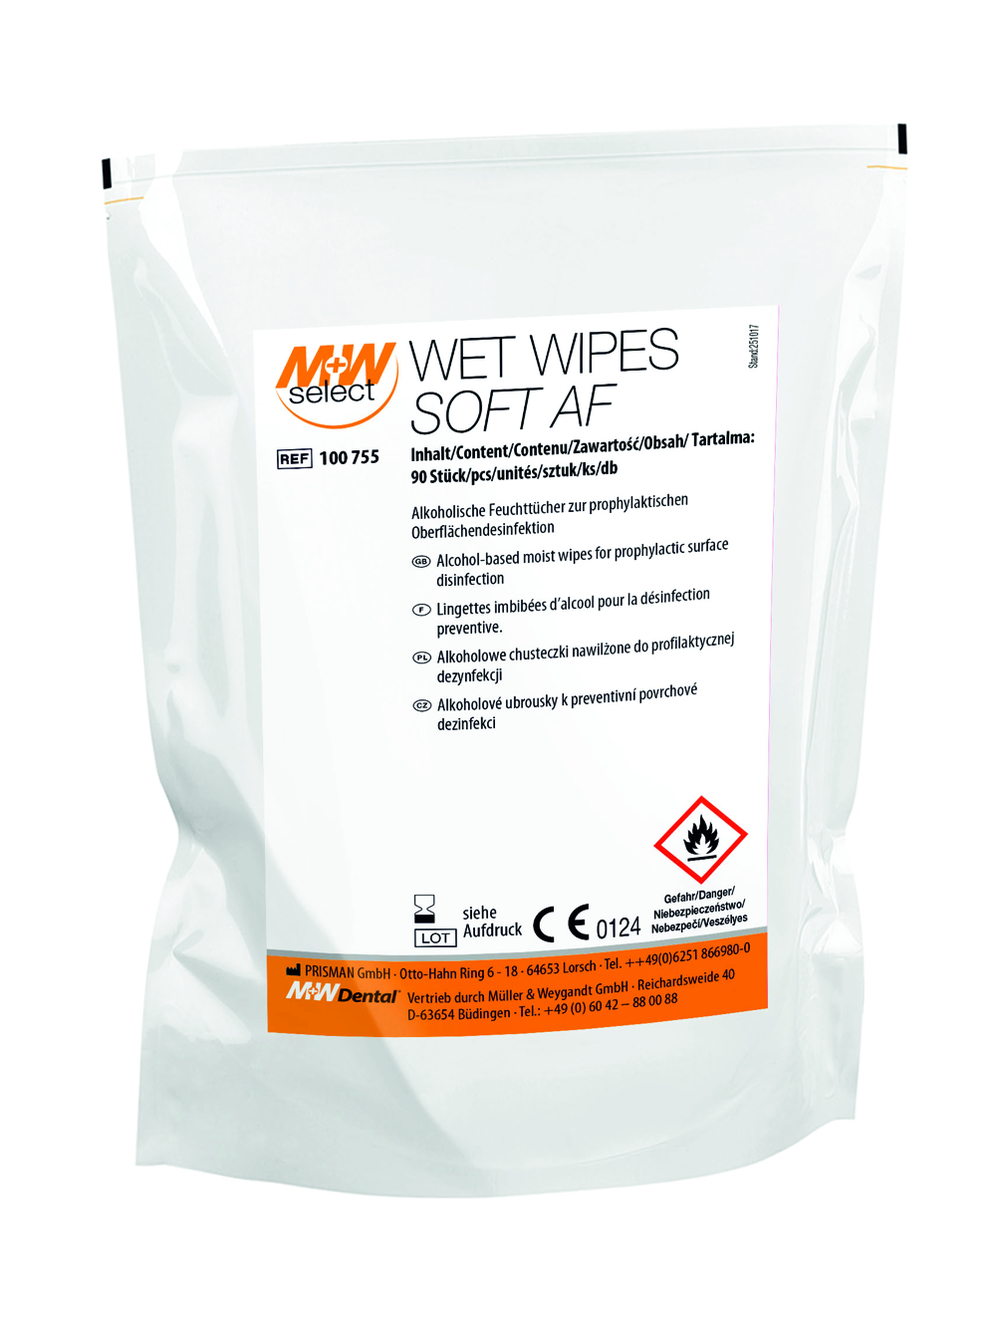 M+W SELECT Wet Wipes Soft